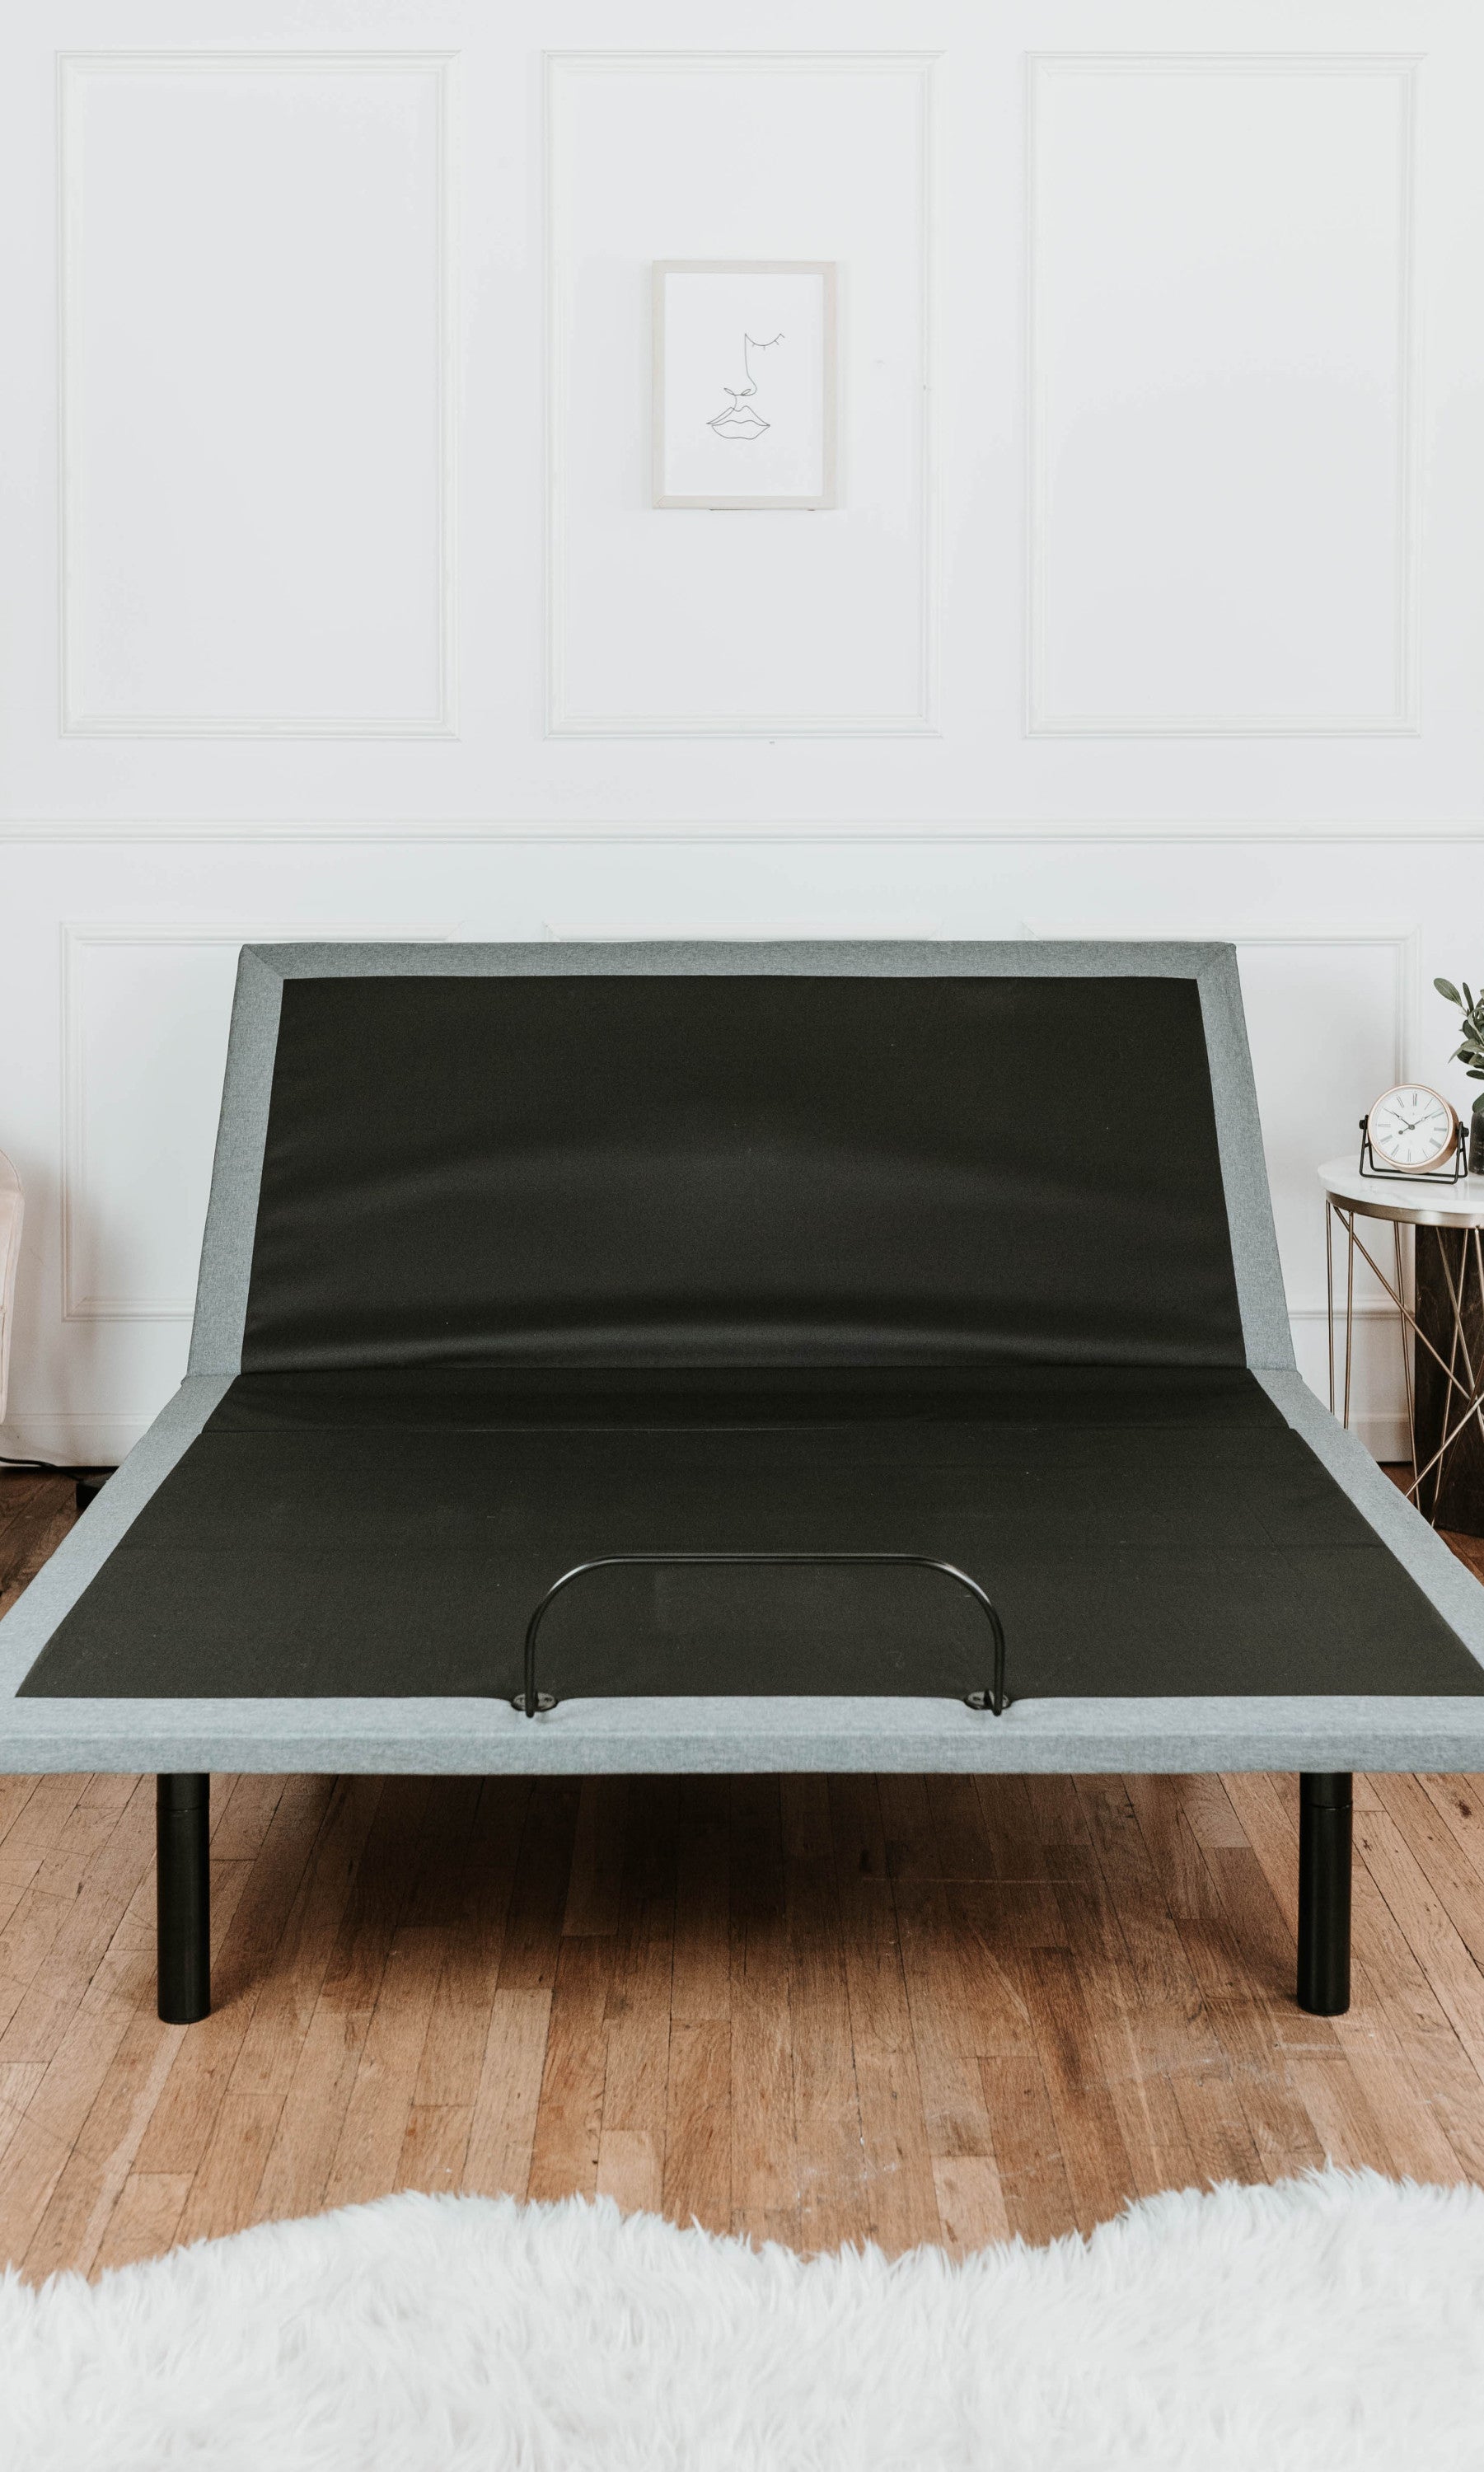 OS5 Black and Grey Adjustable Bed Base With Head and Foot Position Adjustments